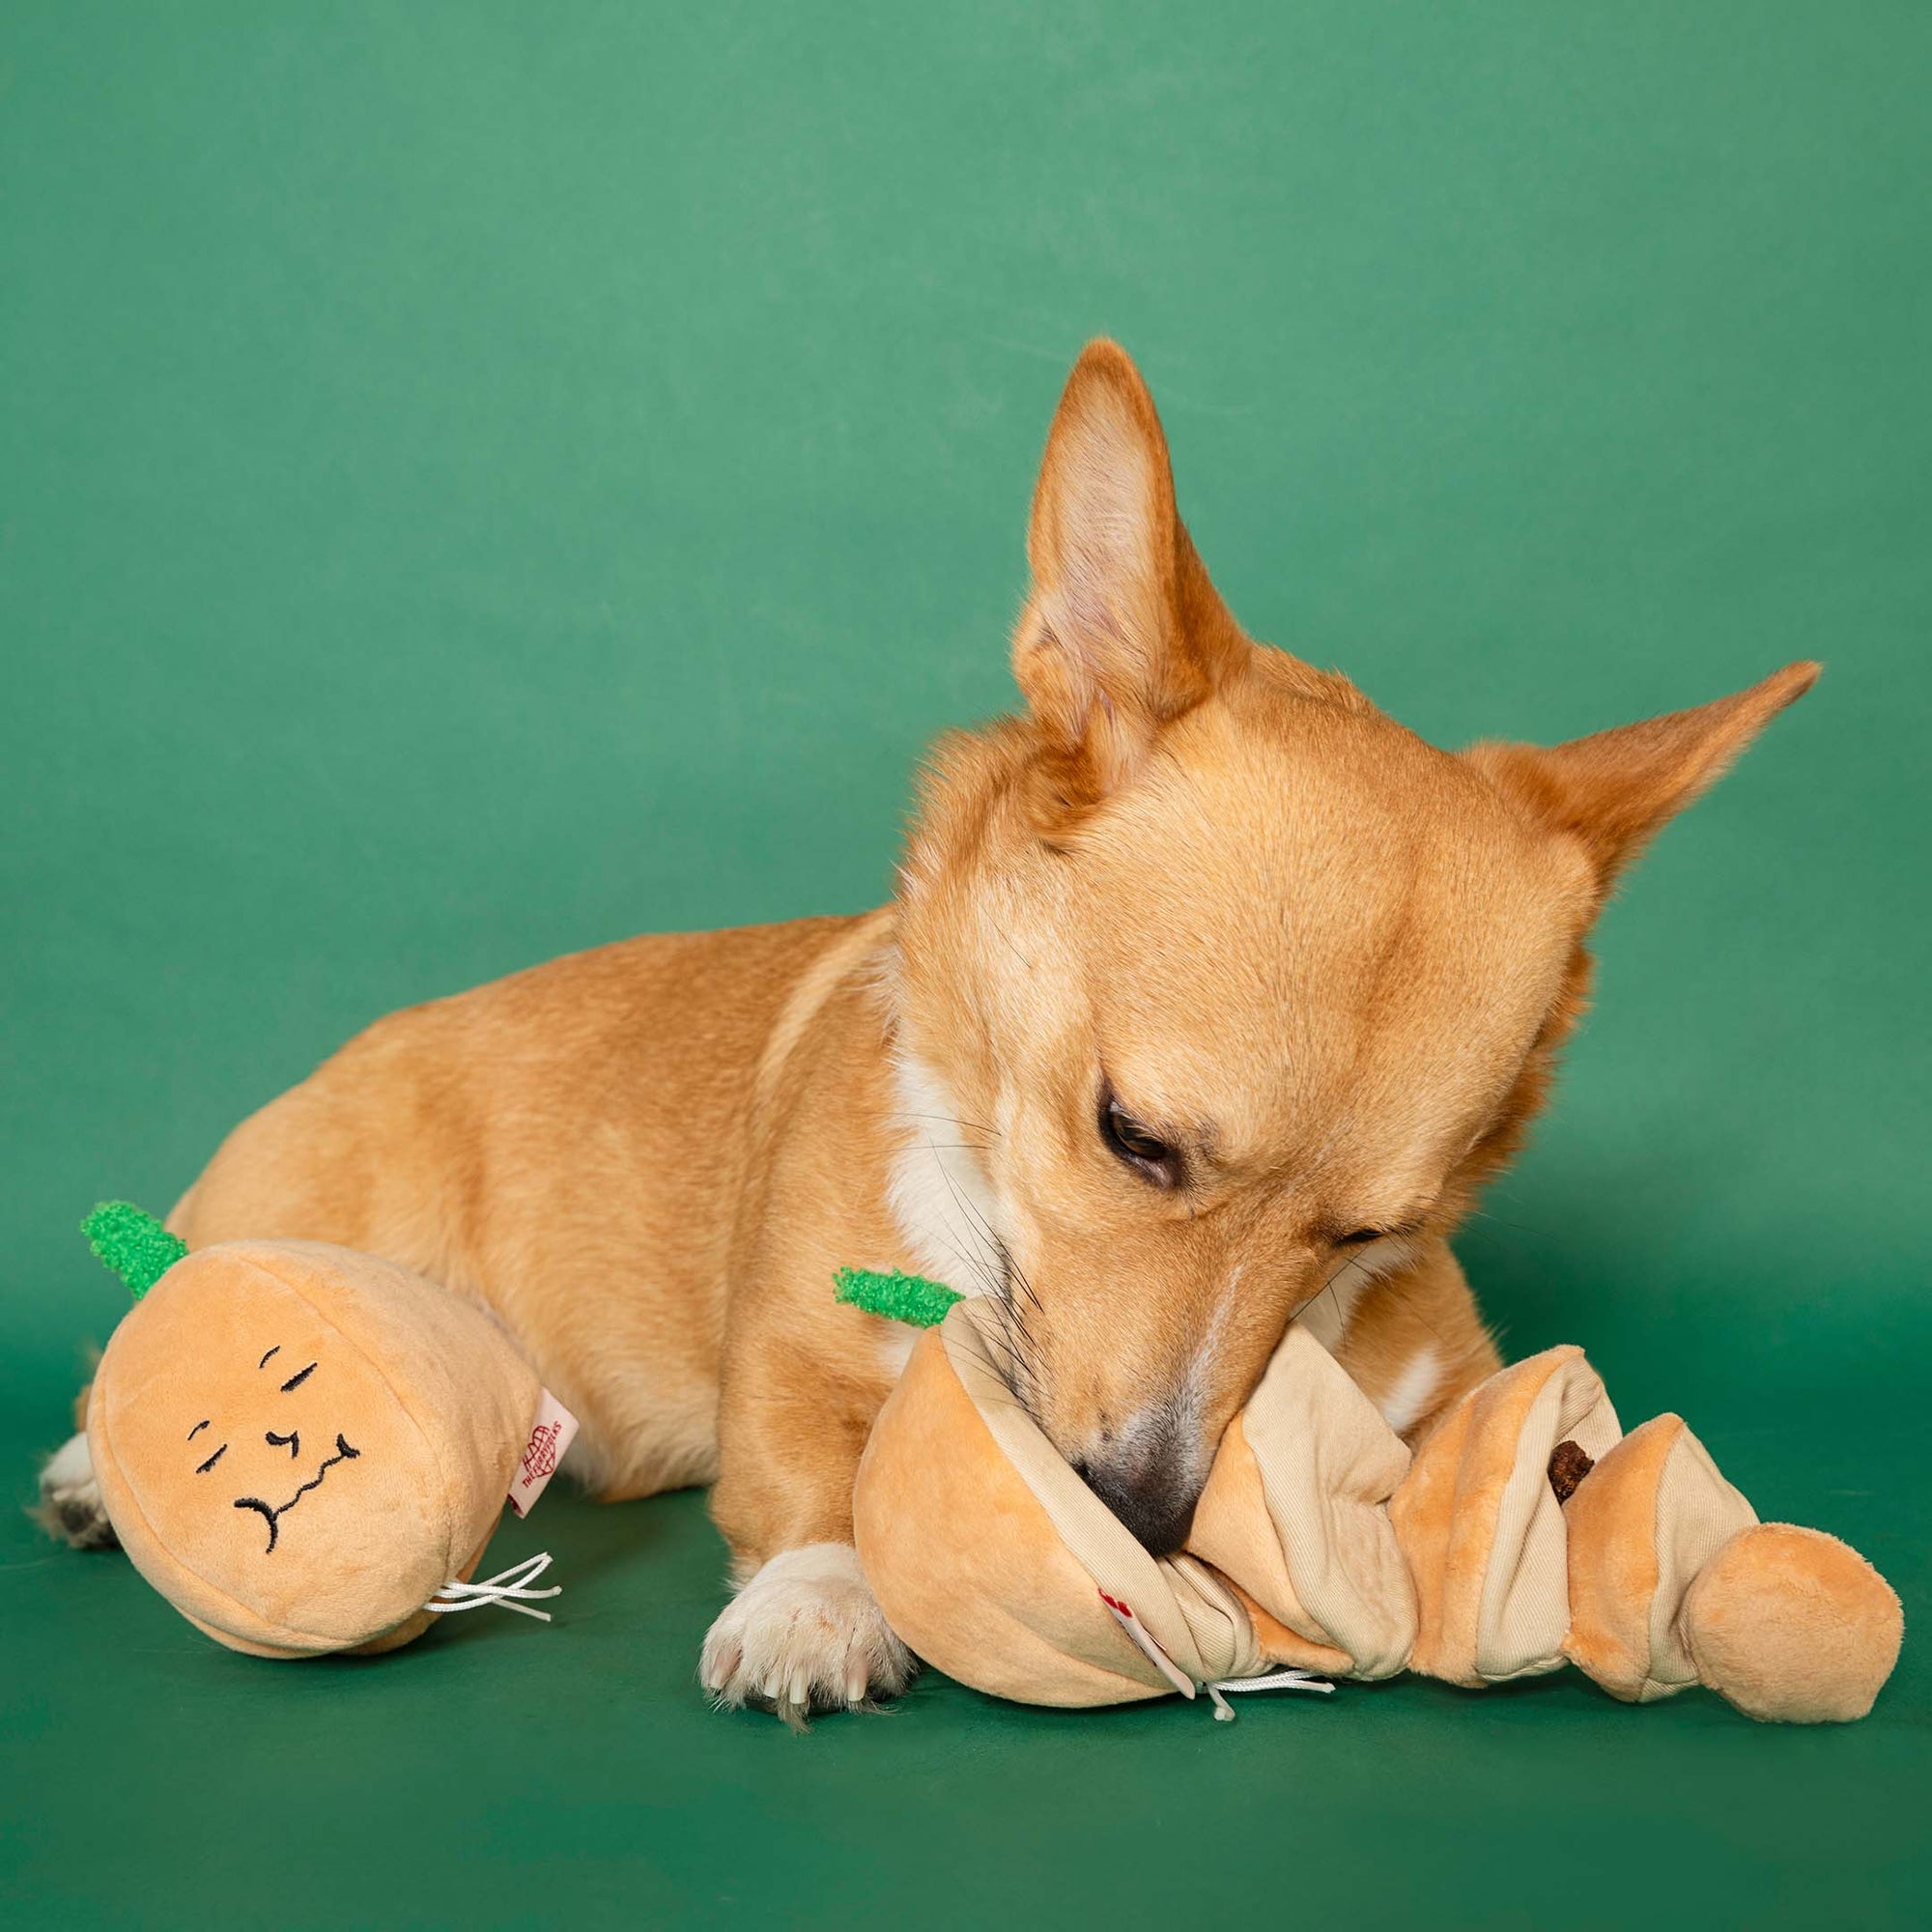 In the image, a tan corgi is attentively interacting with a yellow onion-shaped plush toy. The toy is in front of the dog, and its focused demeanor suggests it is engaged in play or investigation of the toy. The green backdrop complements the green accent of the toy's top, creating a harmonious color palette that highlights the dog and its activity.